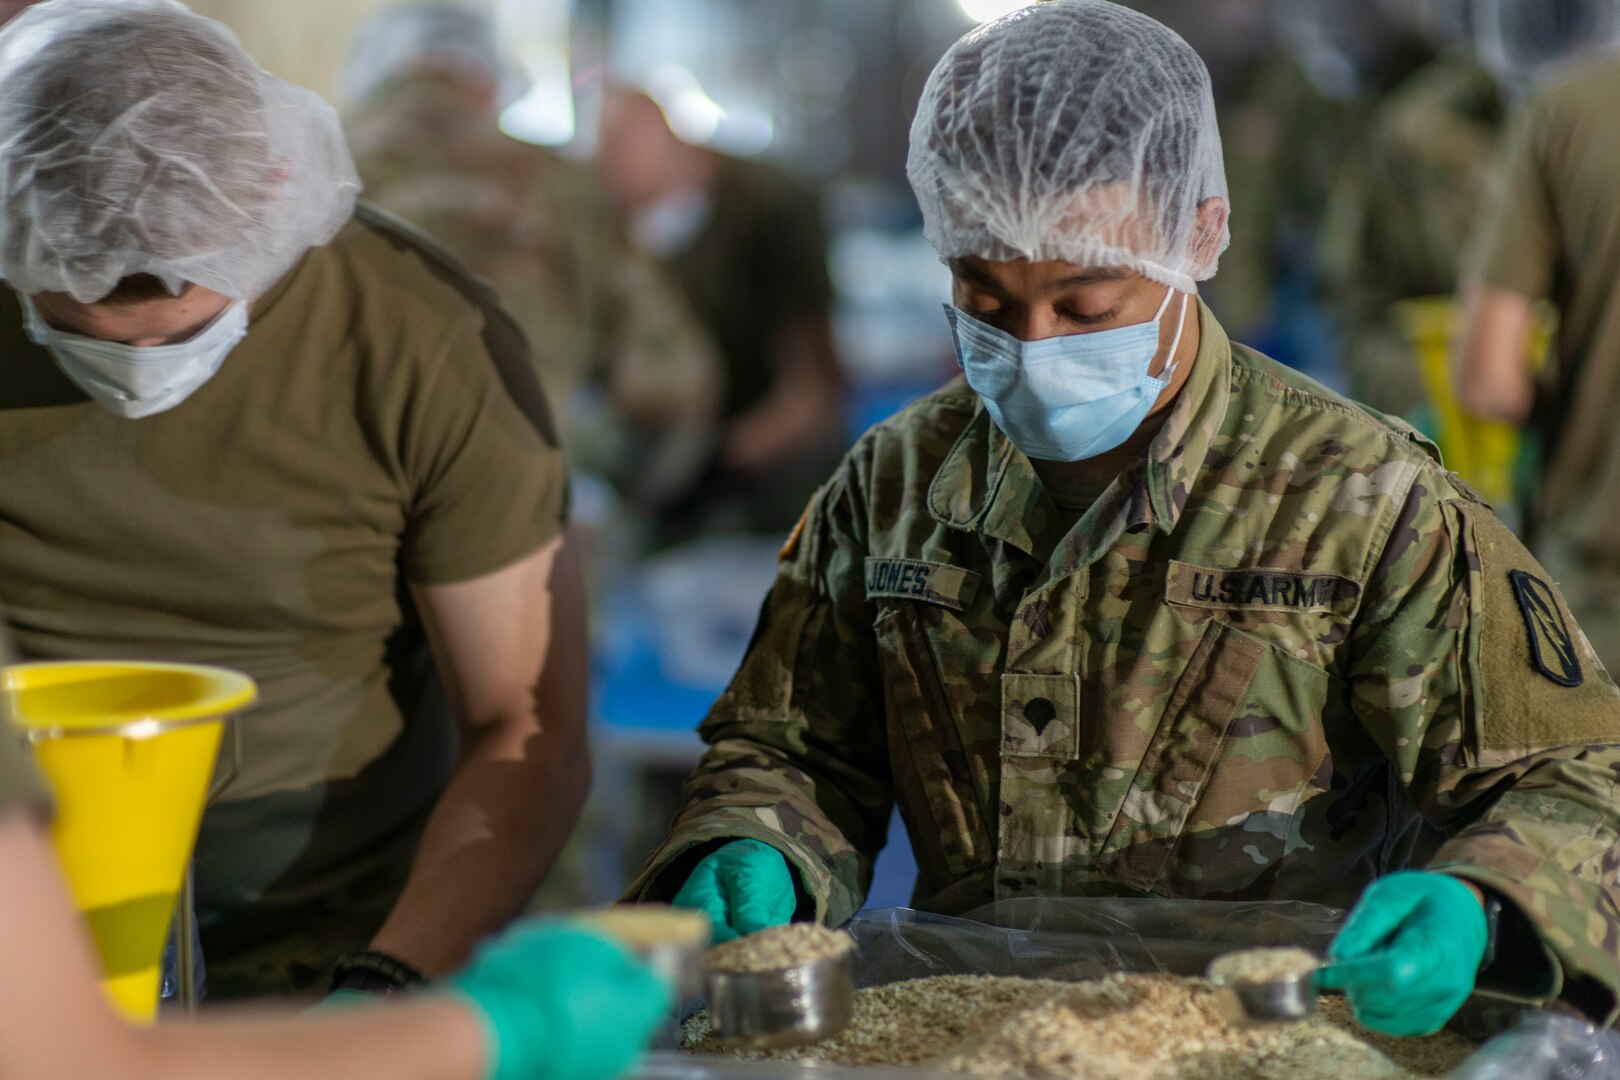 Spc. Dondi Jones, Company A, 2nd Combined Arms Battalion, 137th Infantry Regiment, measures out food in a boxed-meal assembly line operation in Leawood, Kansas, May 1, 2020. Kansas National Guard Soldiers, through The Outreach Program, packaged more than 2 million meals to be distributed to food banks across Kansas.